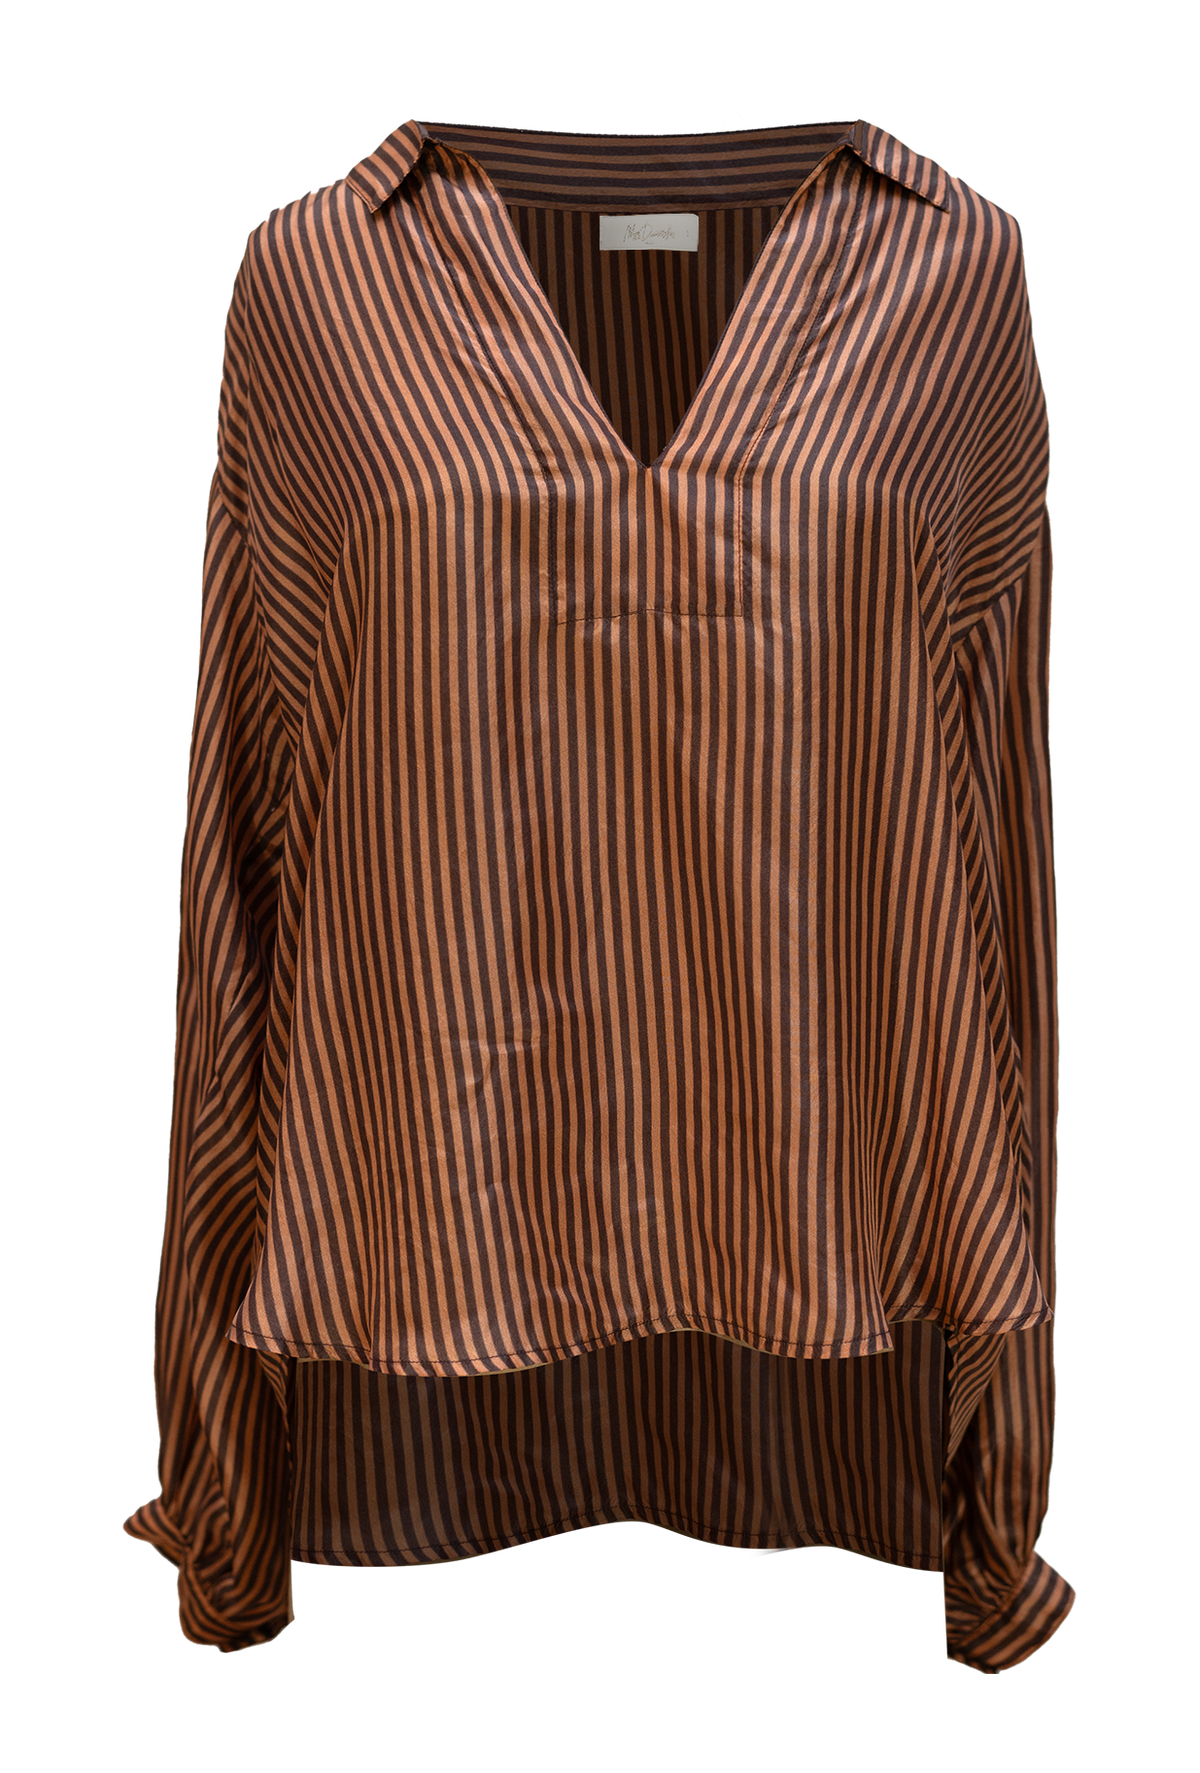 Brown striped silk top with notch neck and collar with long sleeves gathered at shoulder and cuff